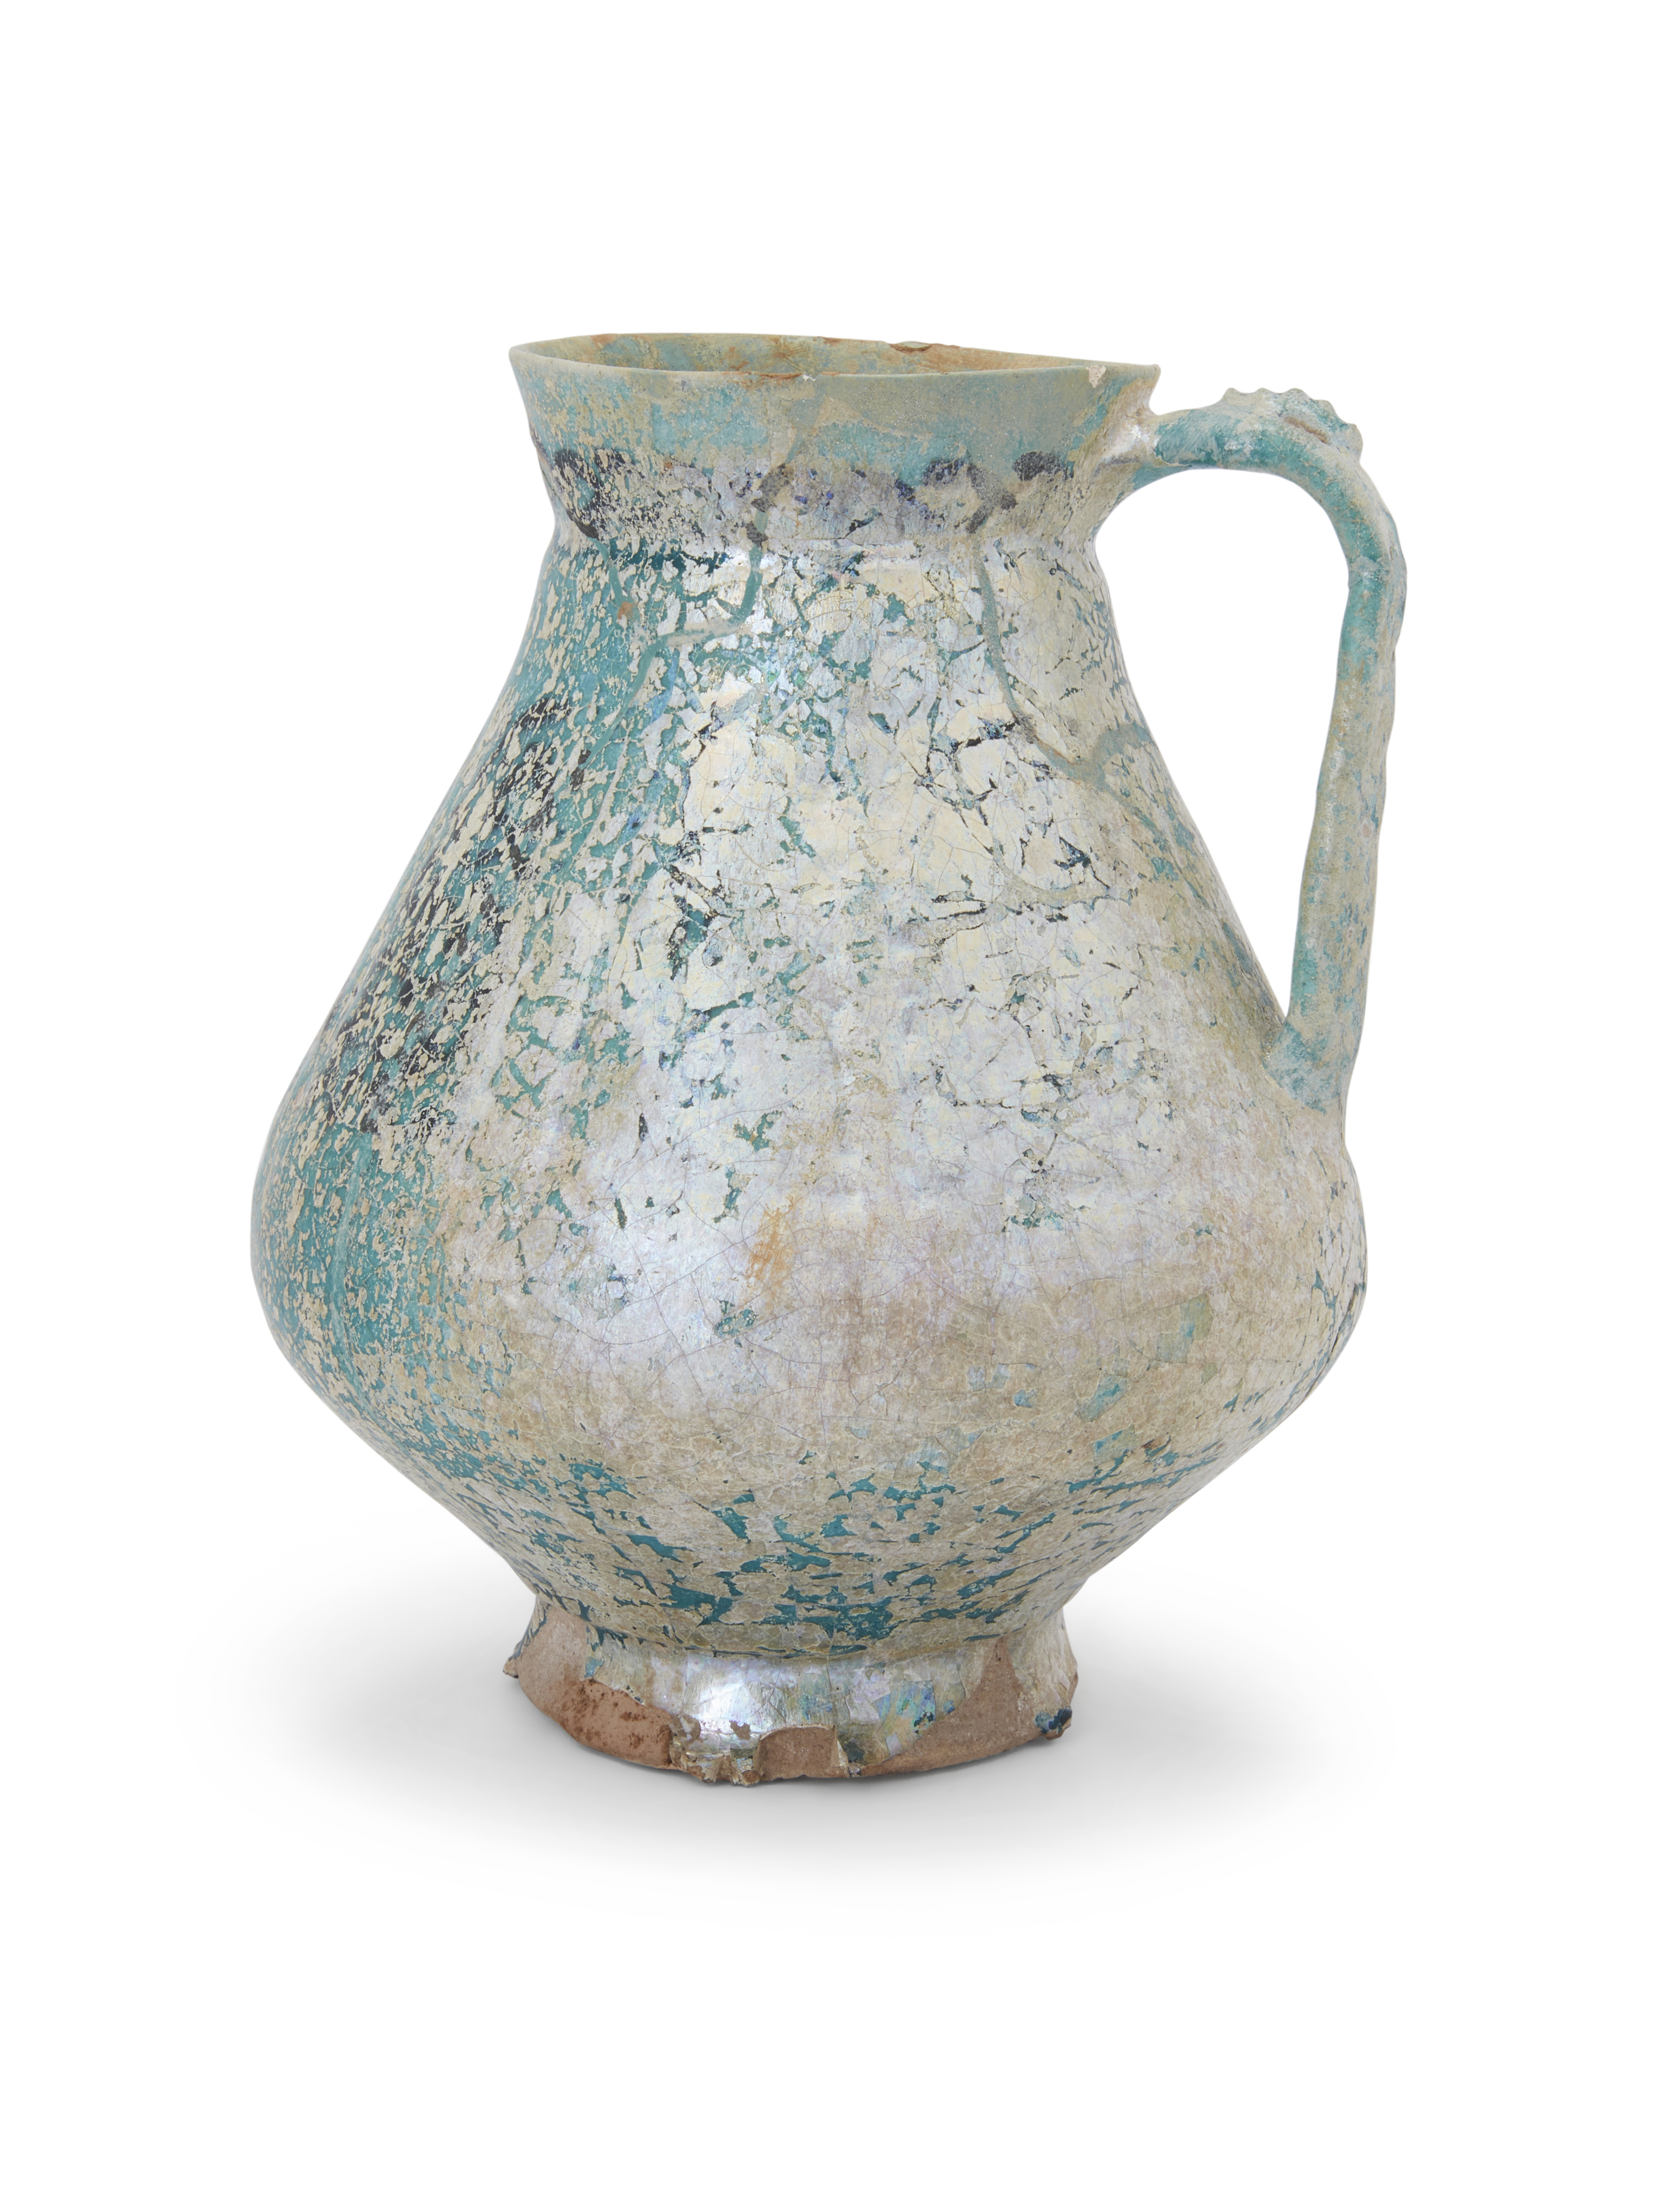 A Kashan turquoise glazed footed pottery jug,   Kashan, central Iran, 12th century, Pyriform, t... - Image 2 of 2